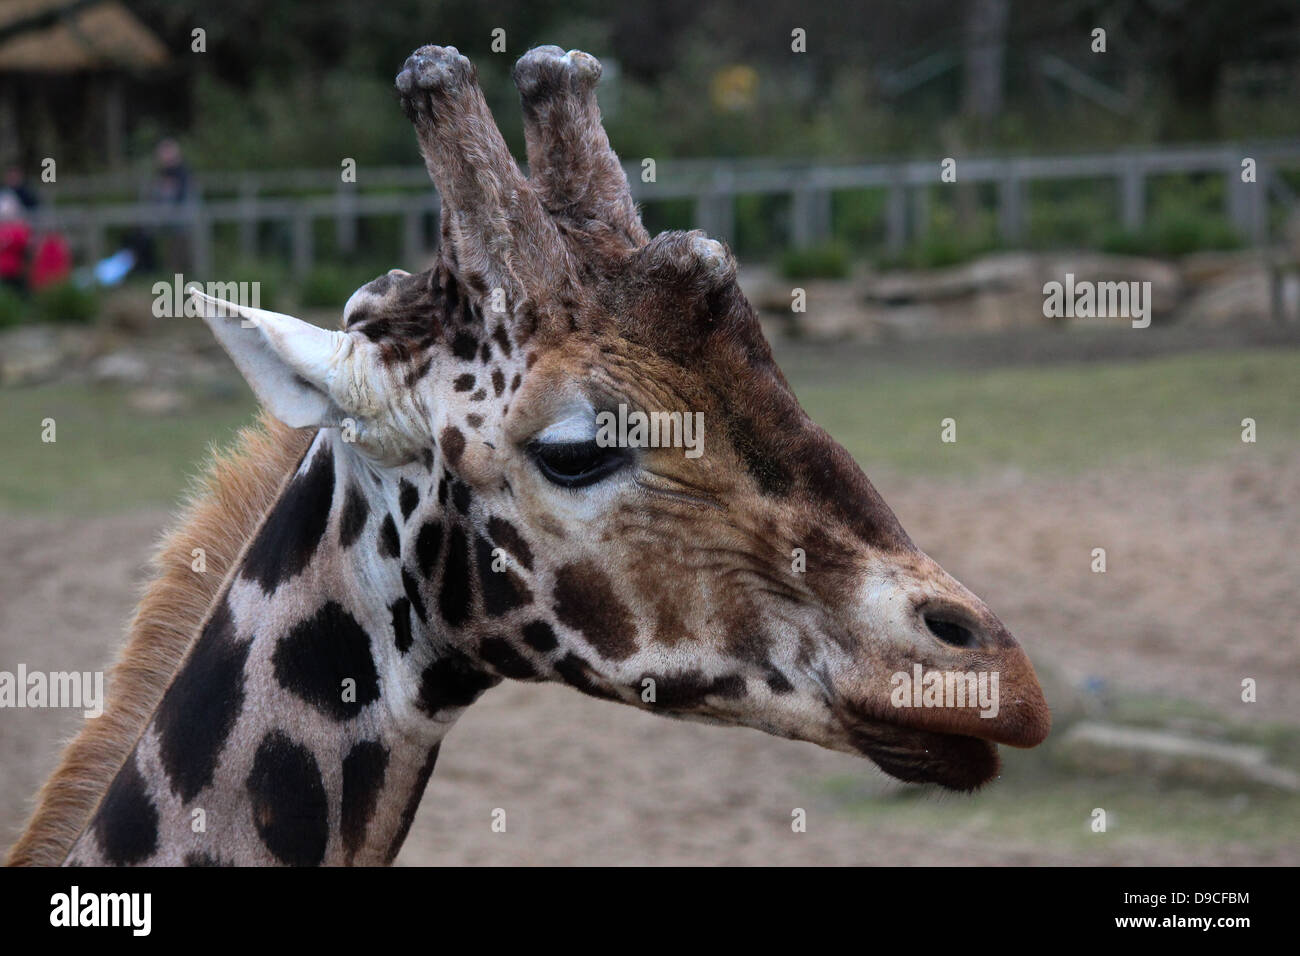 Pictured is a giraffe living in Dublin Zoo, Ireland. Stock Photo